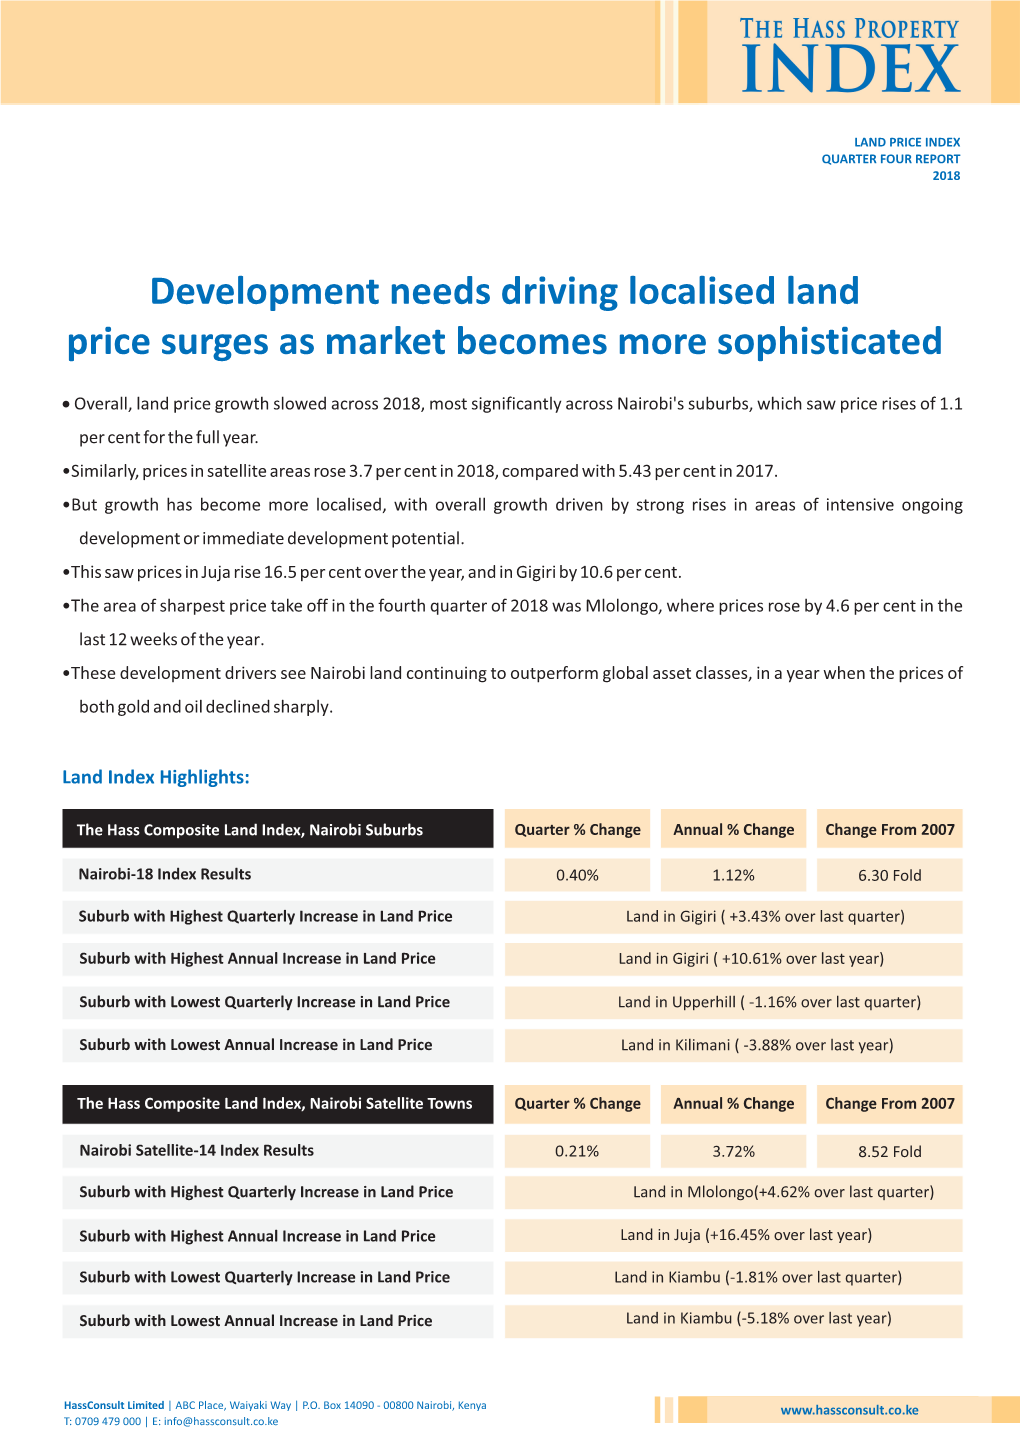 Development Needs Driving Localised Land Price Surges As Market Becomes More Sophisticated